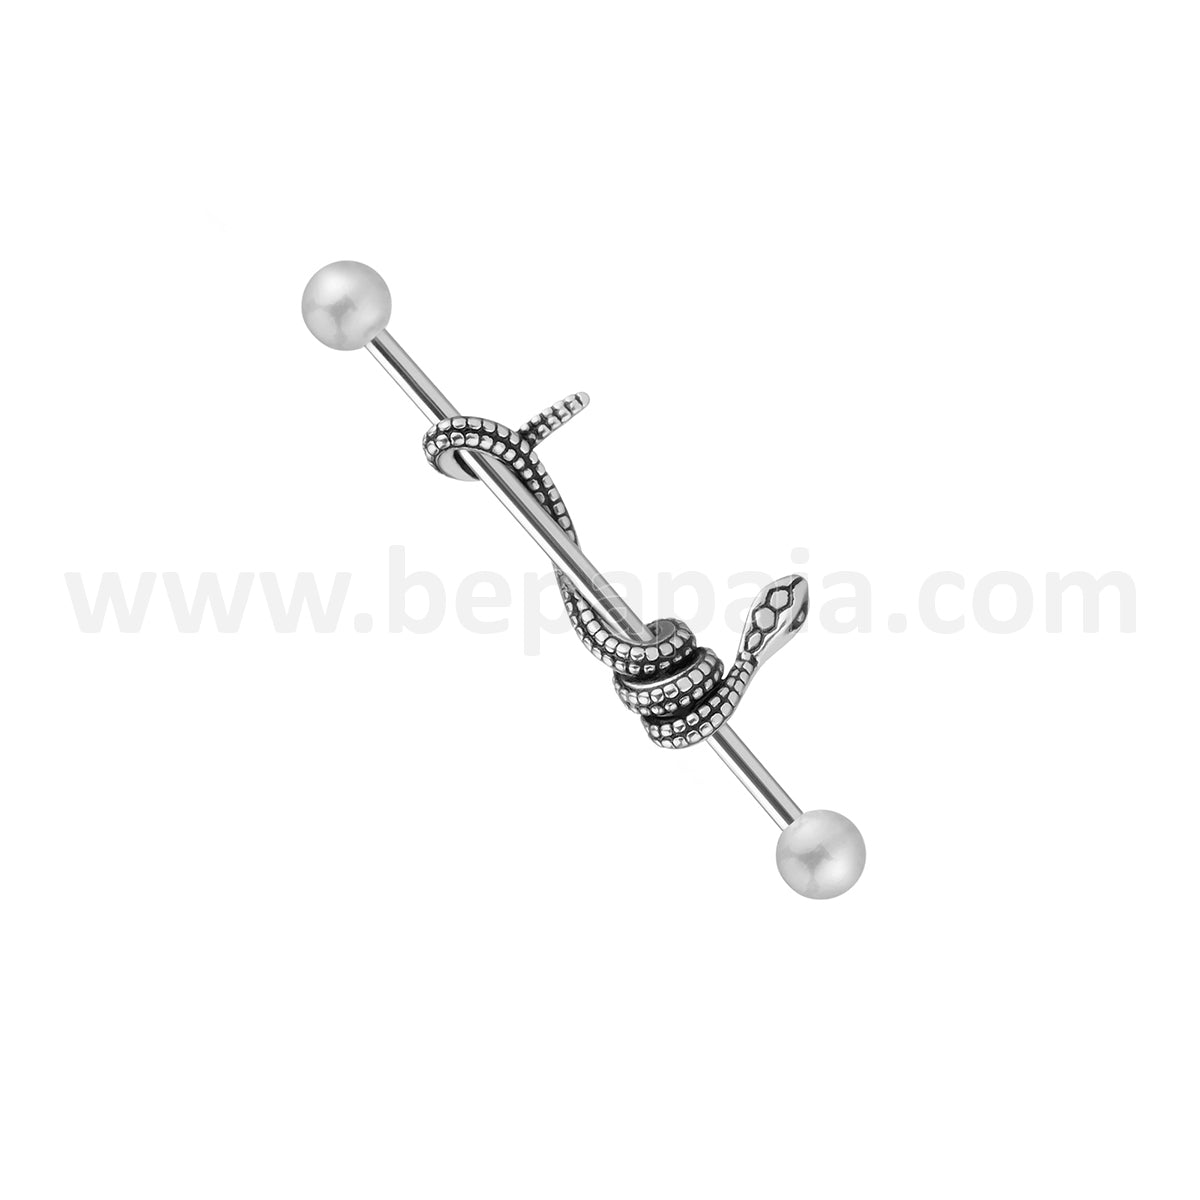 Industrial piercing with snake and arrow